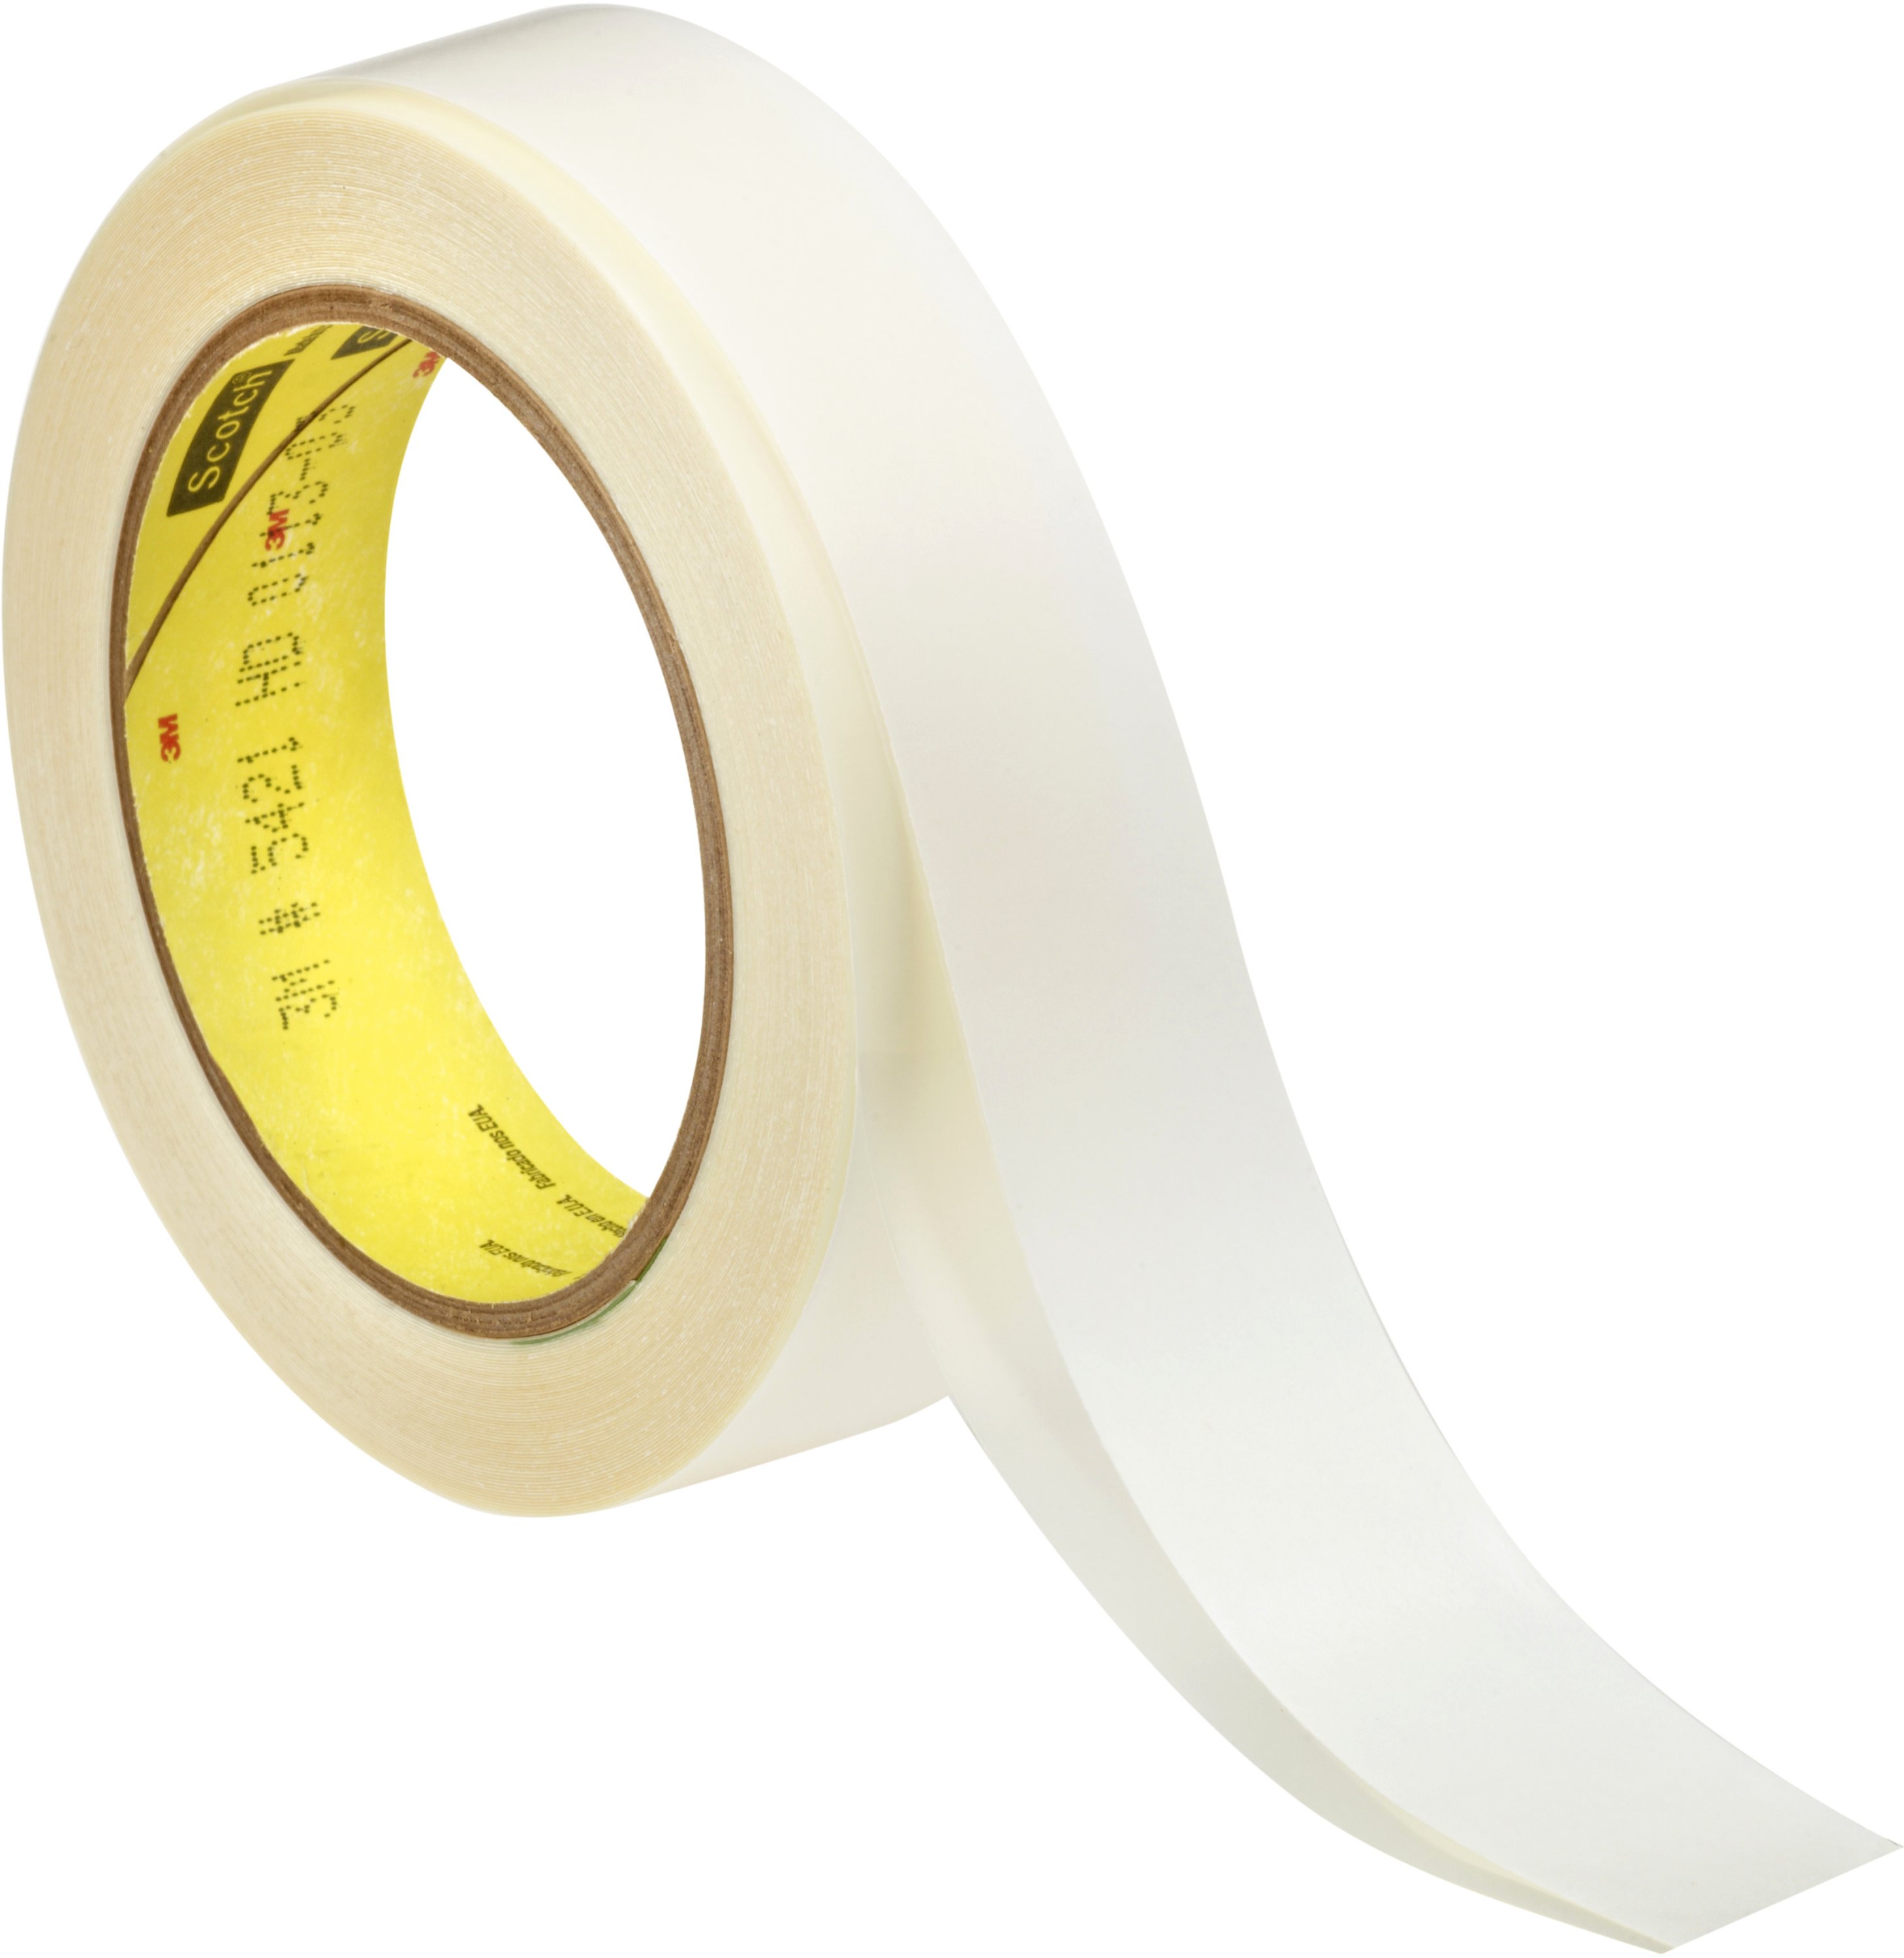 The effectiveness of 3M™ UHMW-PE Film Tape 5421 lies in its Ultra-High Molecular Weight polyethylene (UHMW-PE) backing.